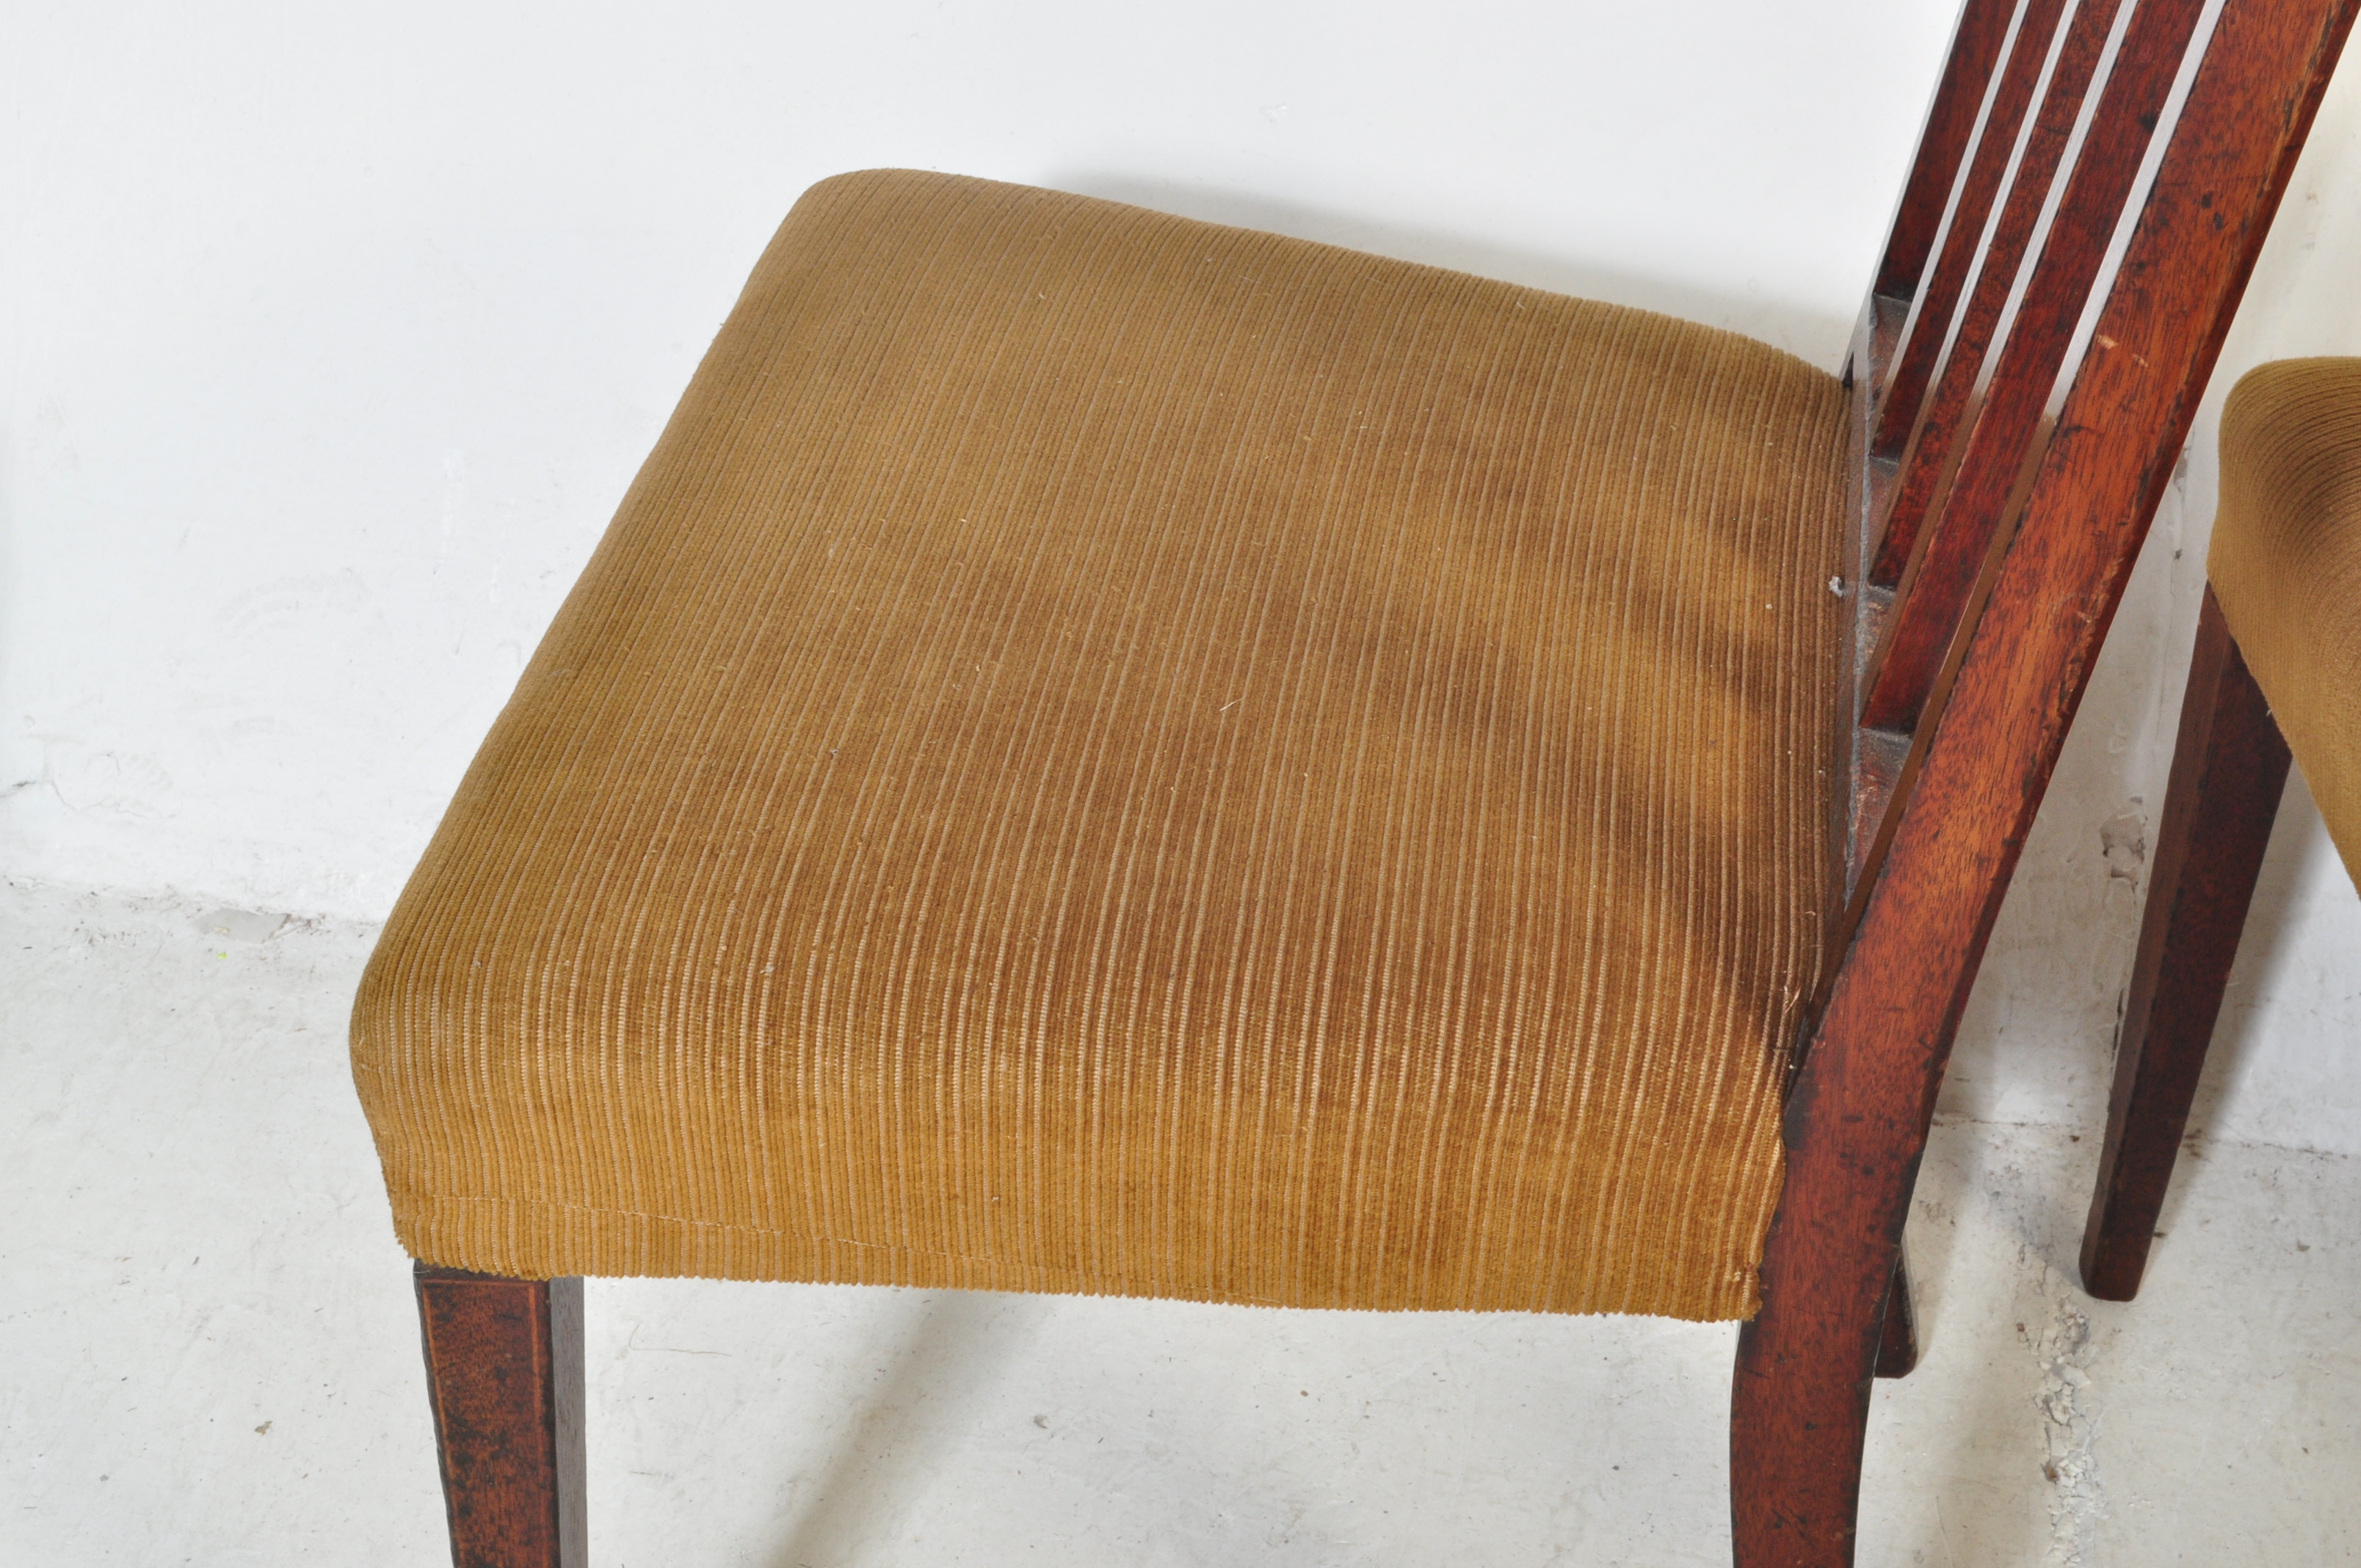 FOUR EDWARDIAN INLAID MAHOGANY DINING CHAIRS - Image 5 of 6